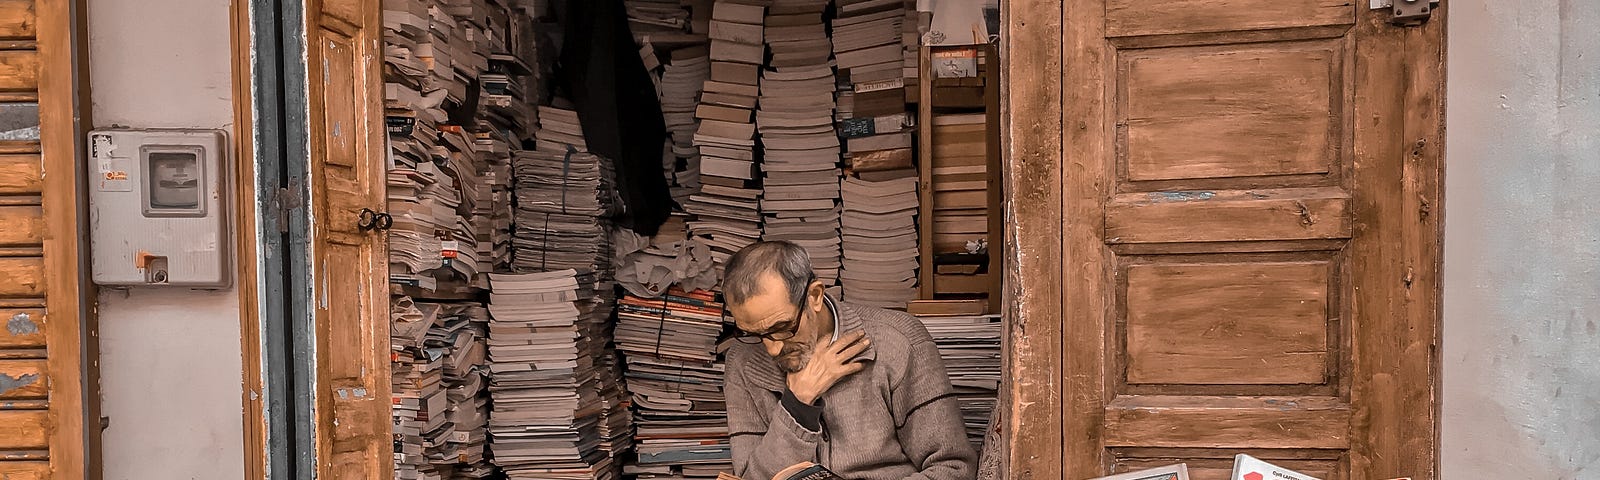 Man reading a book surrounded by books